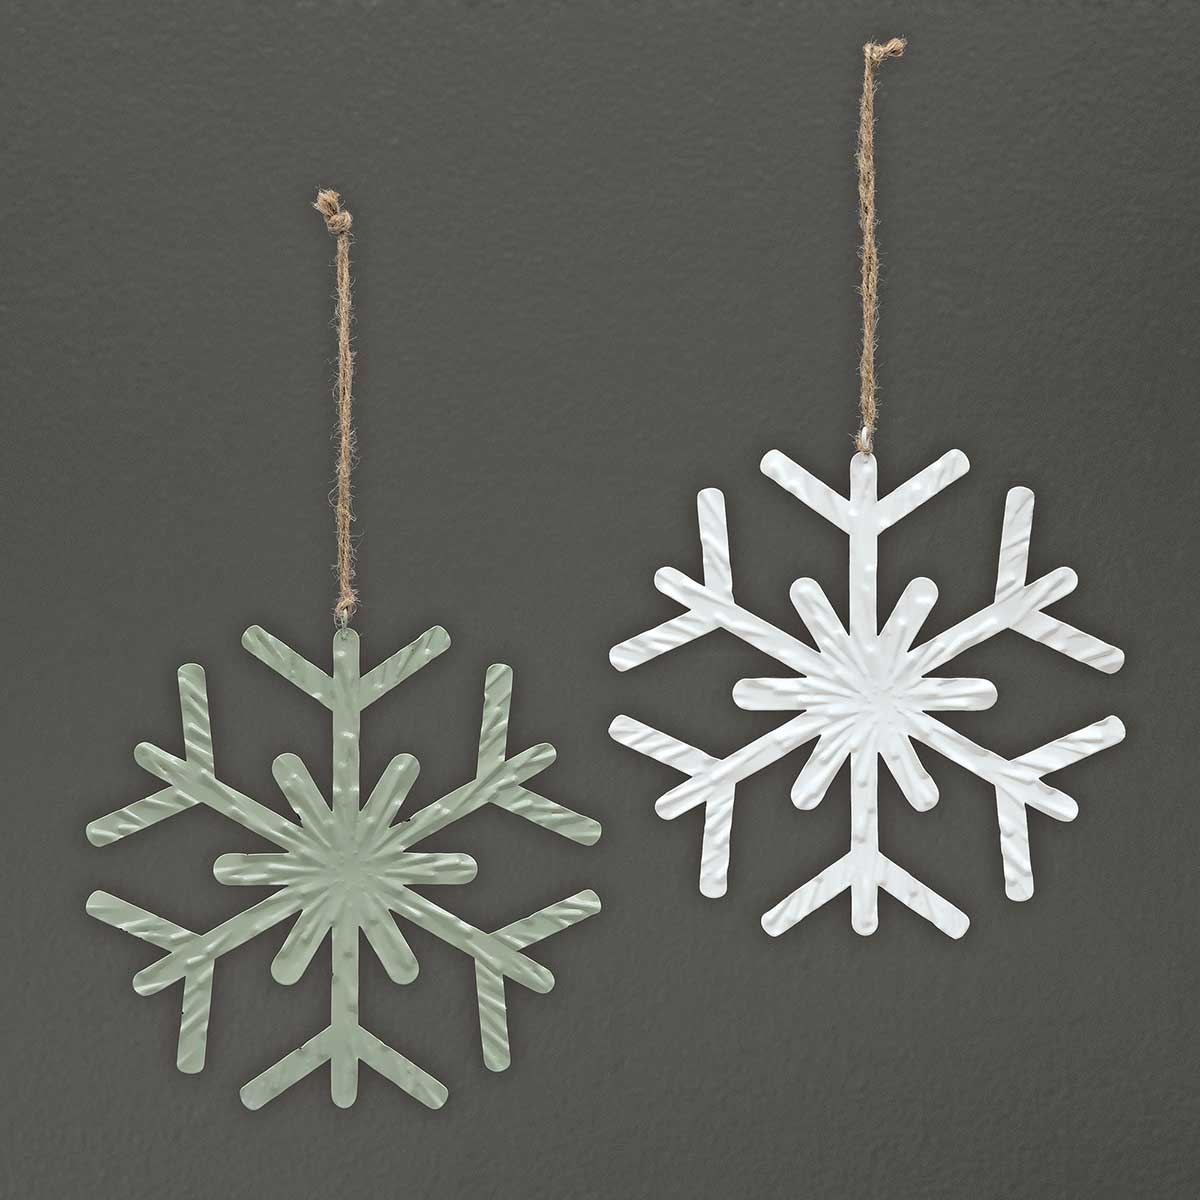 METAL TEXTURED SNOWFLAKE ORNAMENT 2 ASSORTED - Click Image to Close